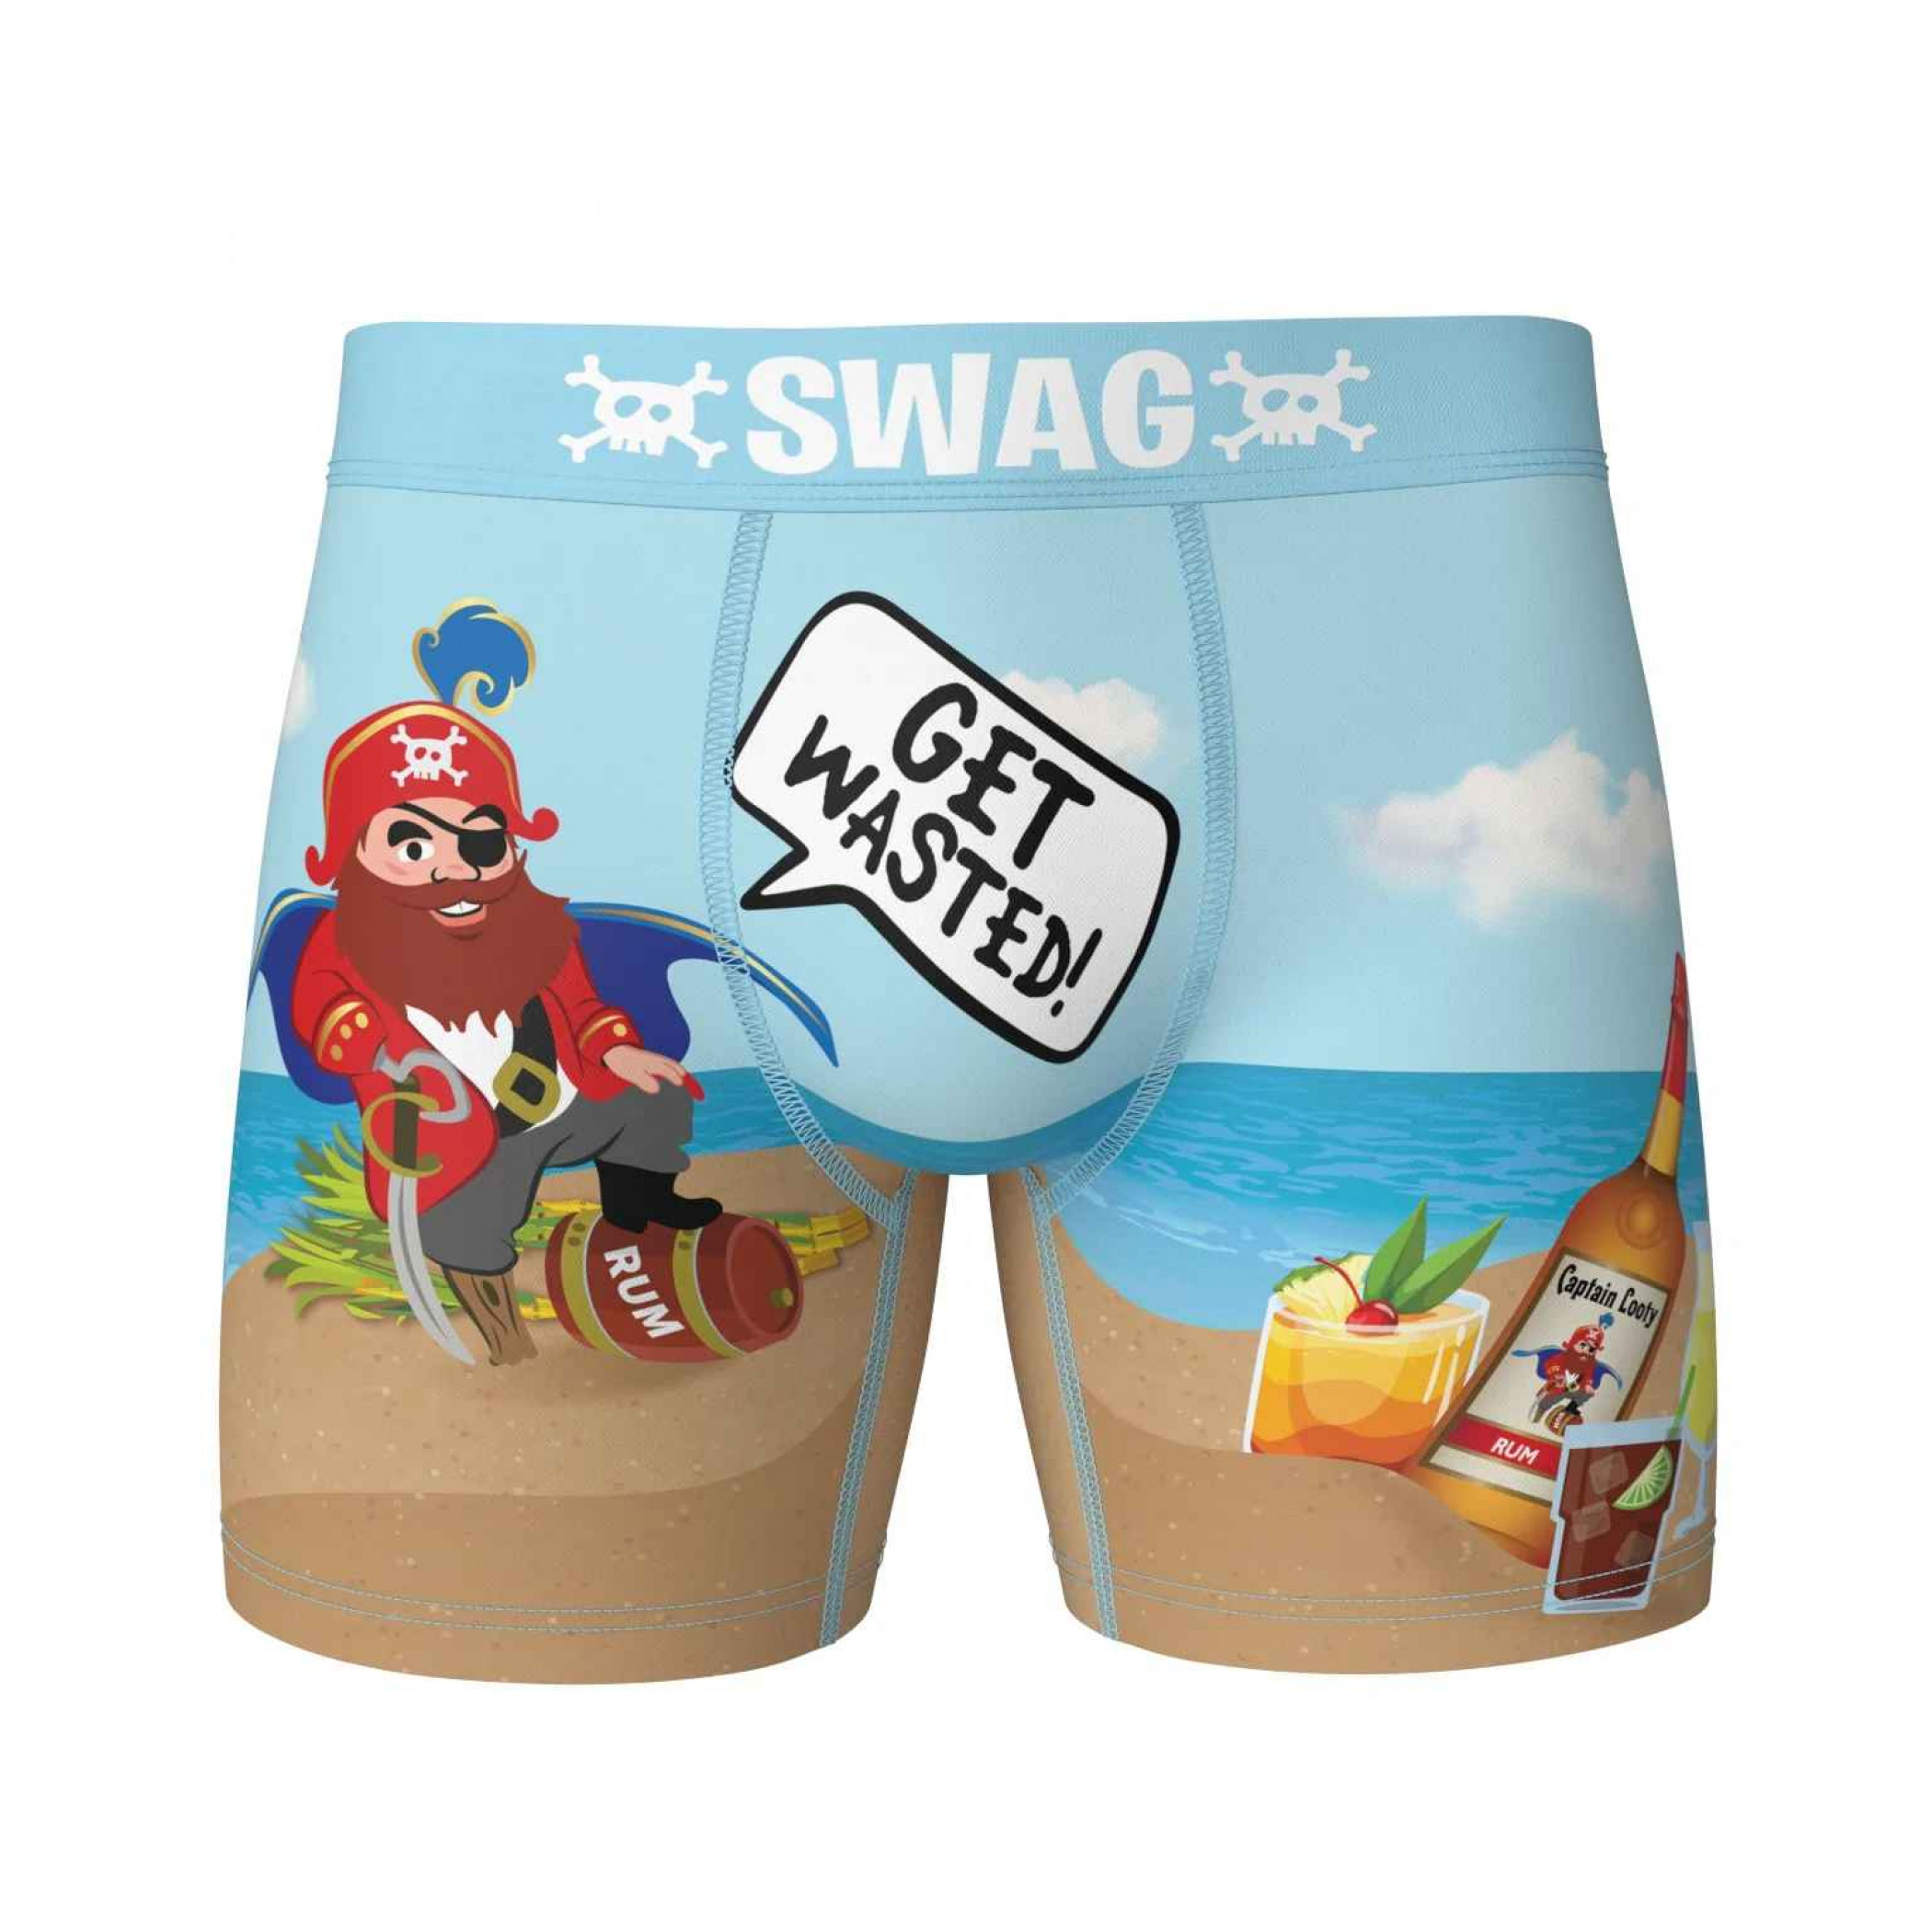 Swag Boxers 